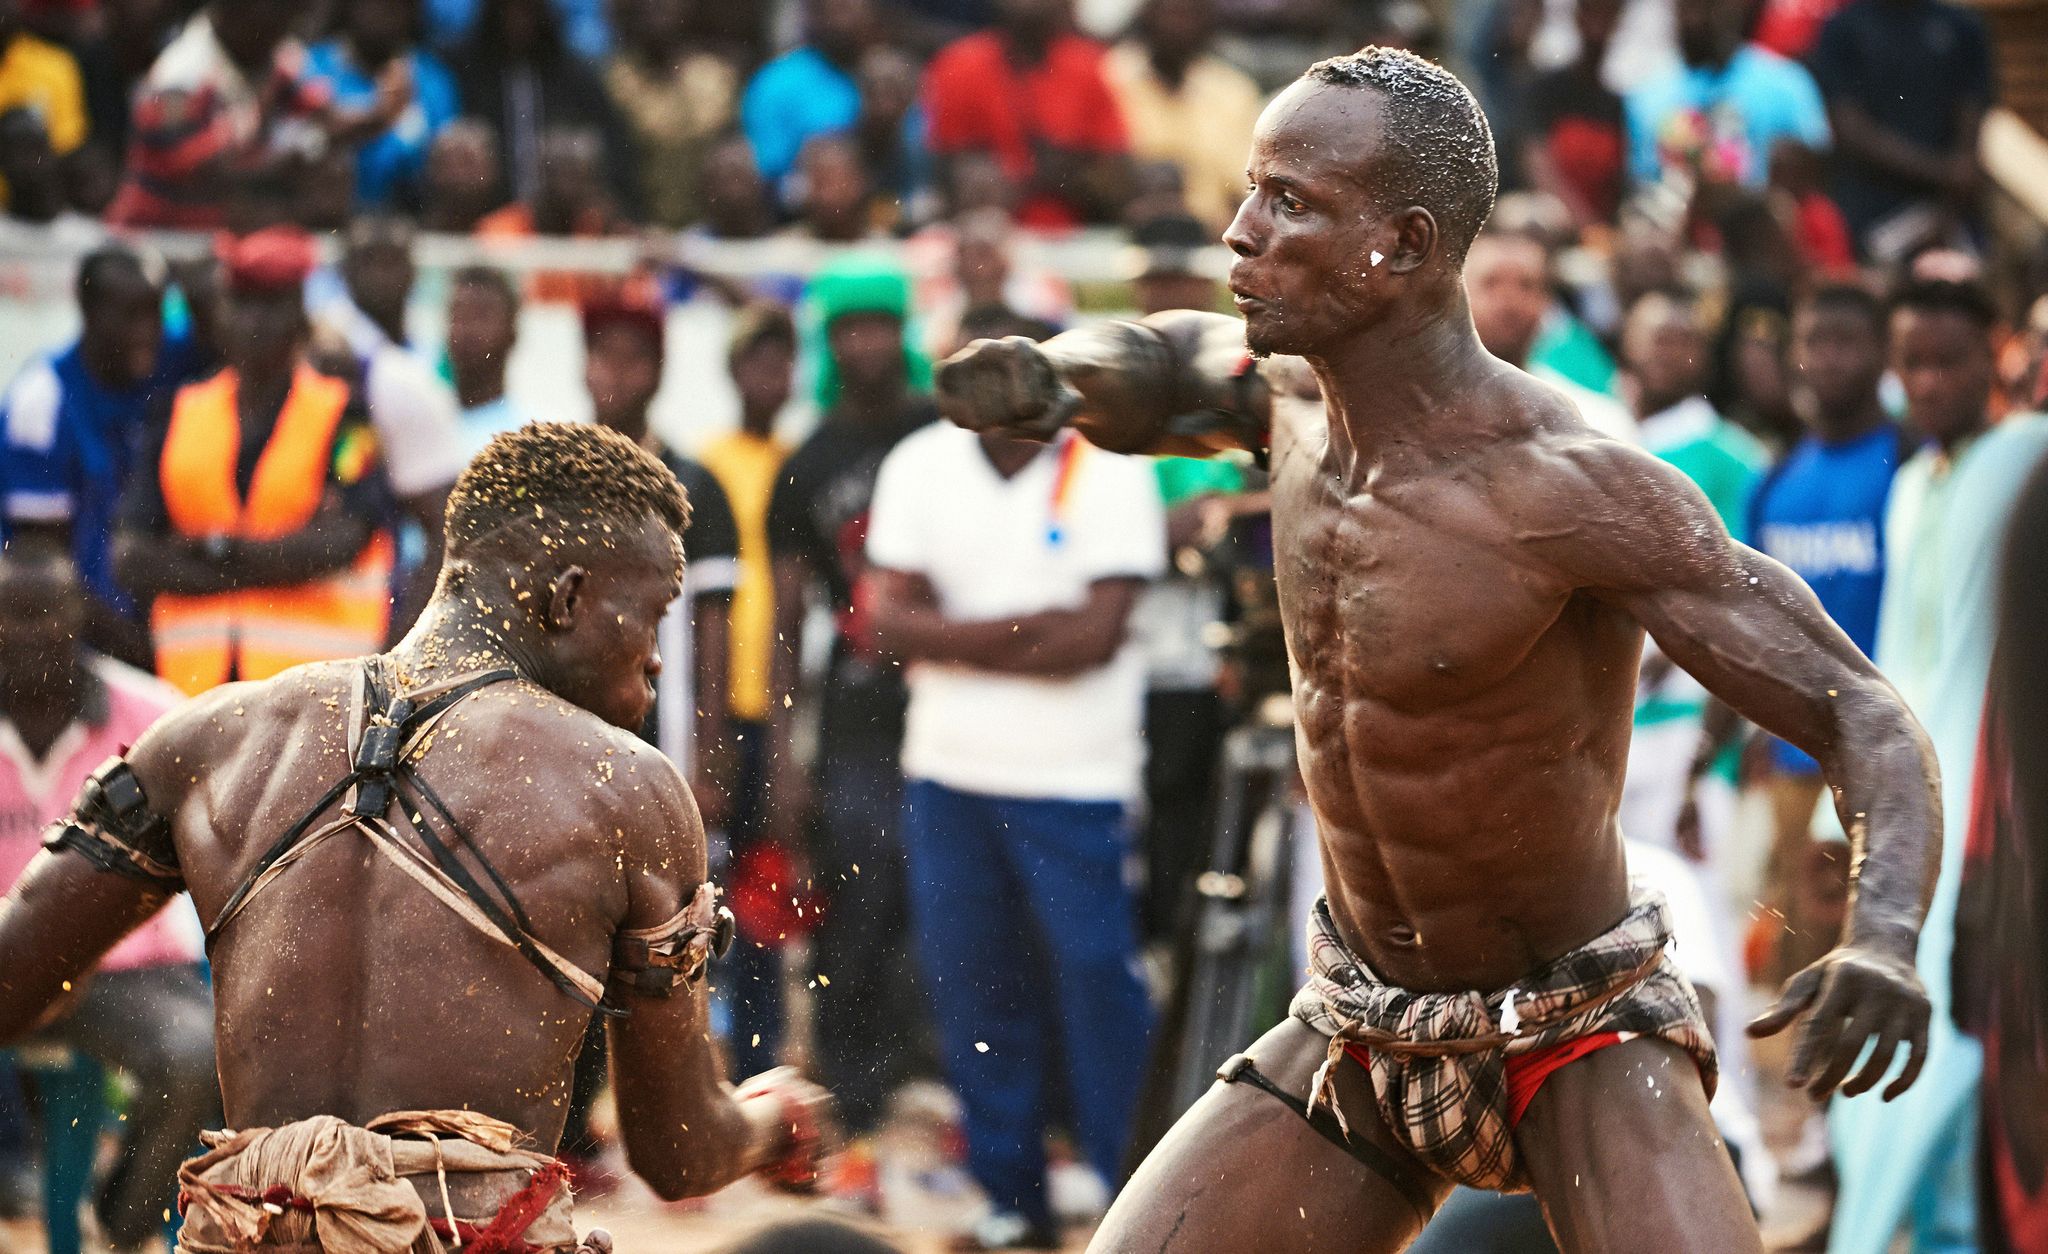 People, Barechested, Human, Crowd, Muscle, Competition event, Contact sport, Event, Tribe, Temple, 